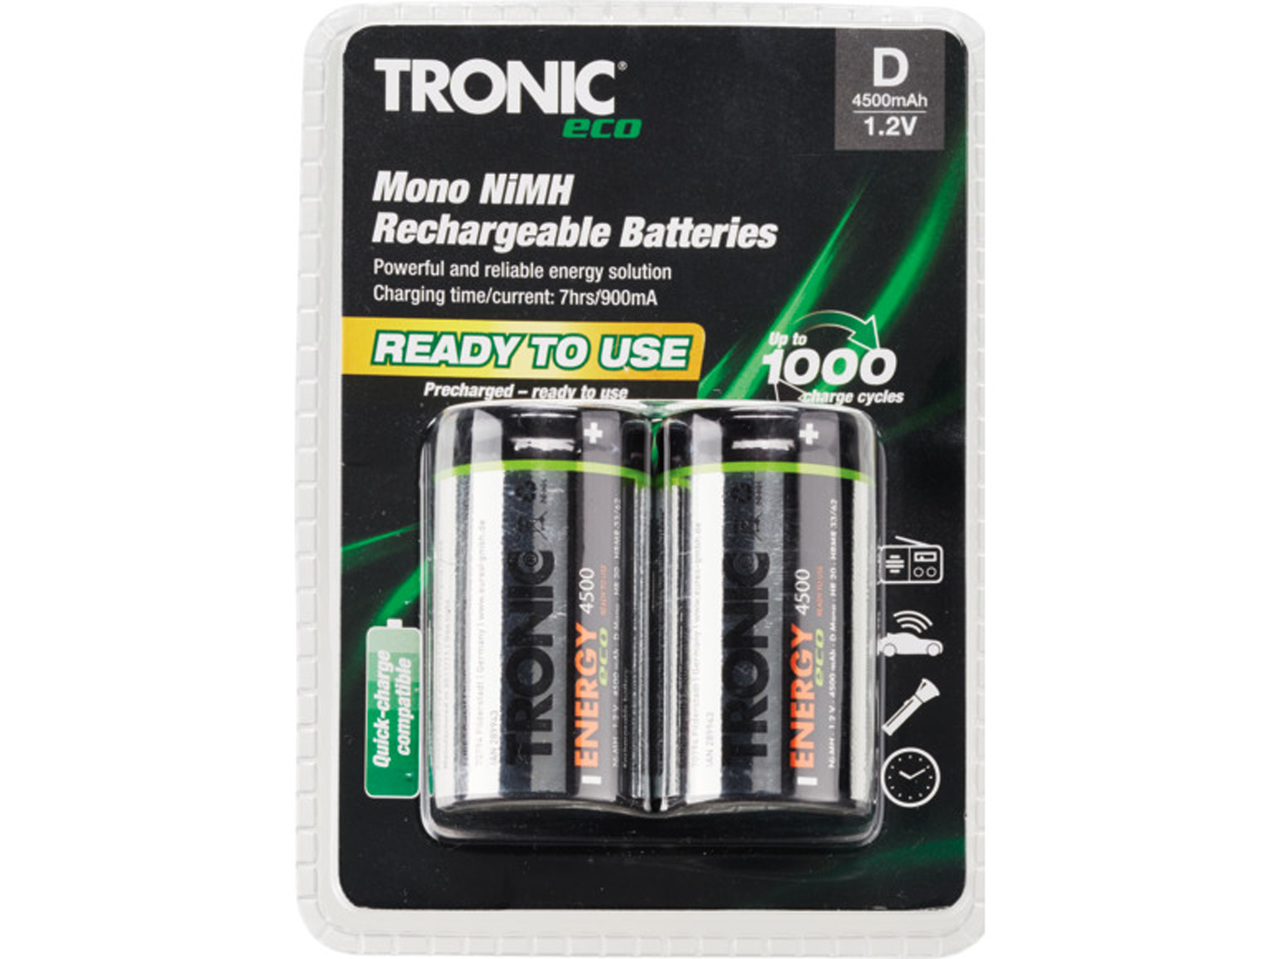 TRONIC Rechargeable Battery Assortment